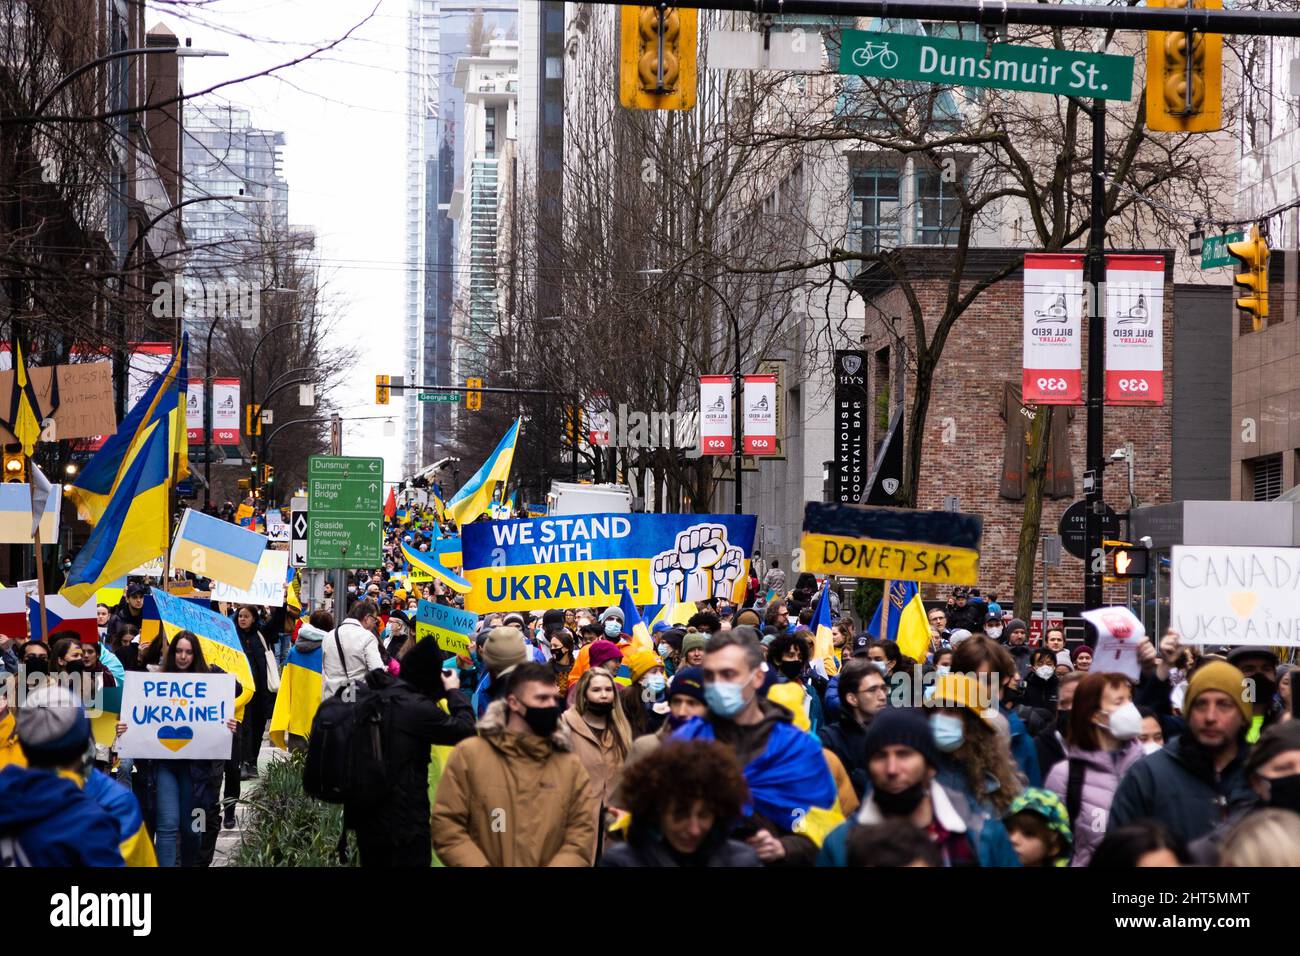 DOWNTOWN VANCOUVER, BC, CANADA - FEB 26, 2022: Protest rally against Vladimir Putin and the Russian invasion of Ukraine that was attended by thousands Stock Photo